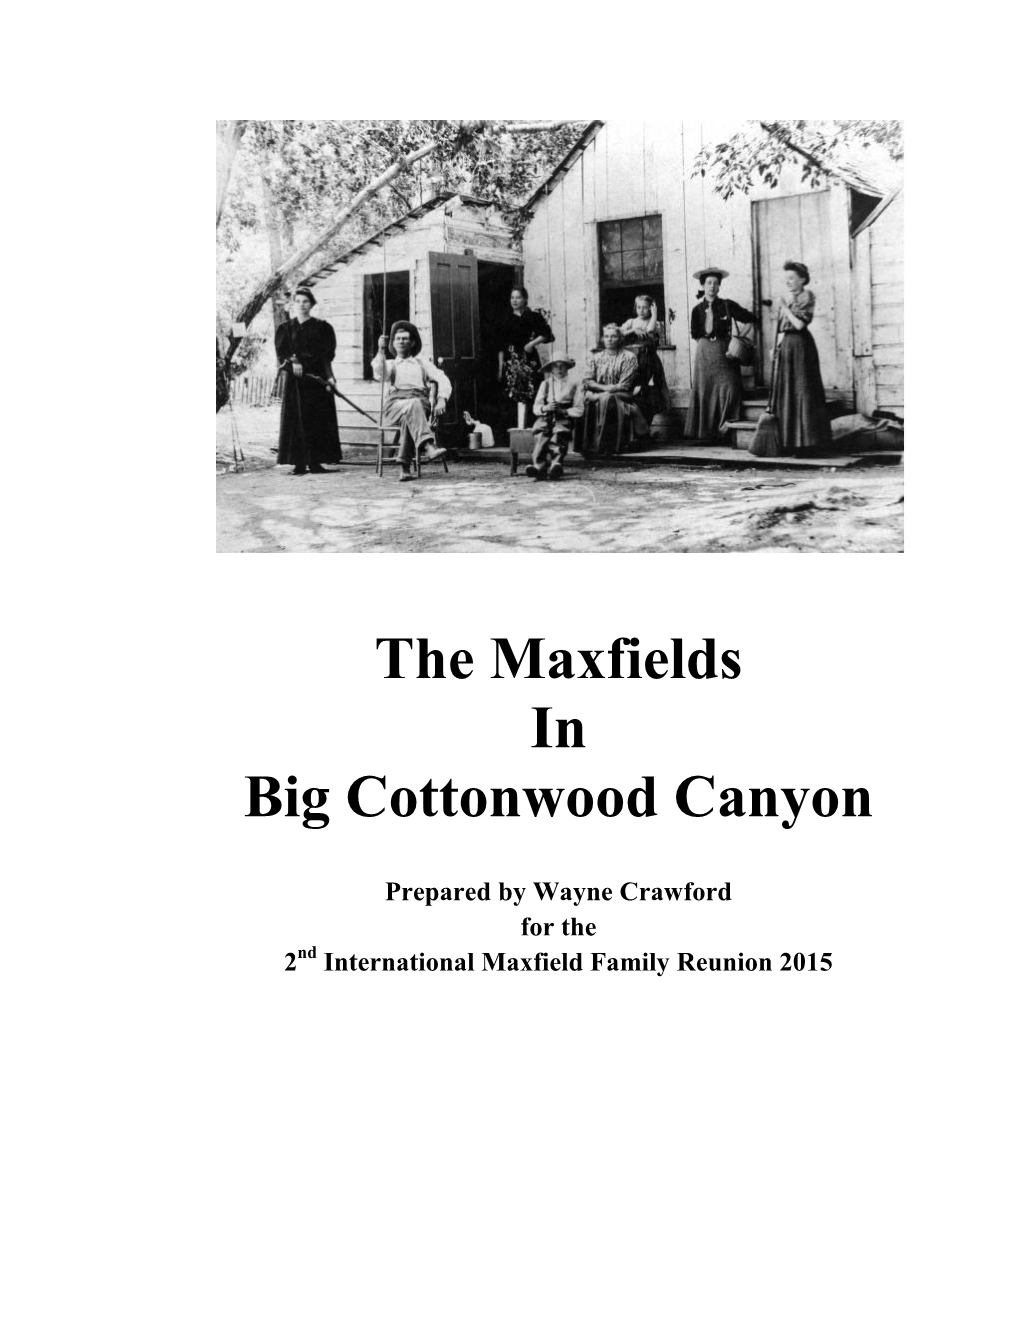 The Maxfields in Big Cottonwood Canyon